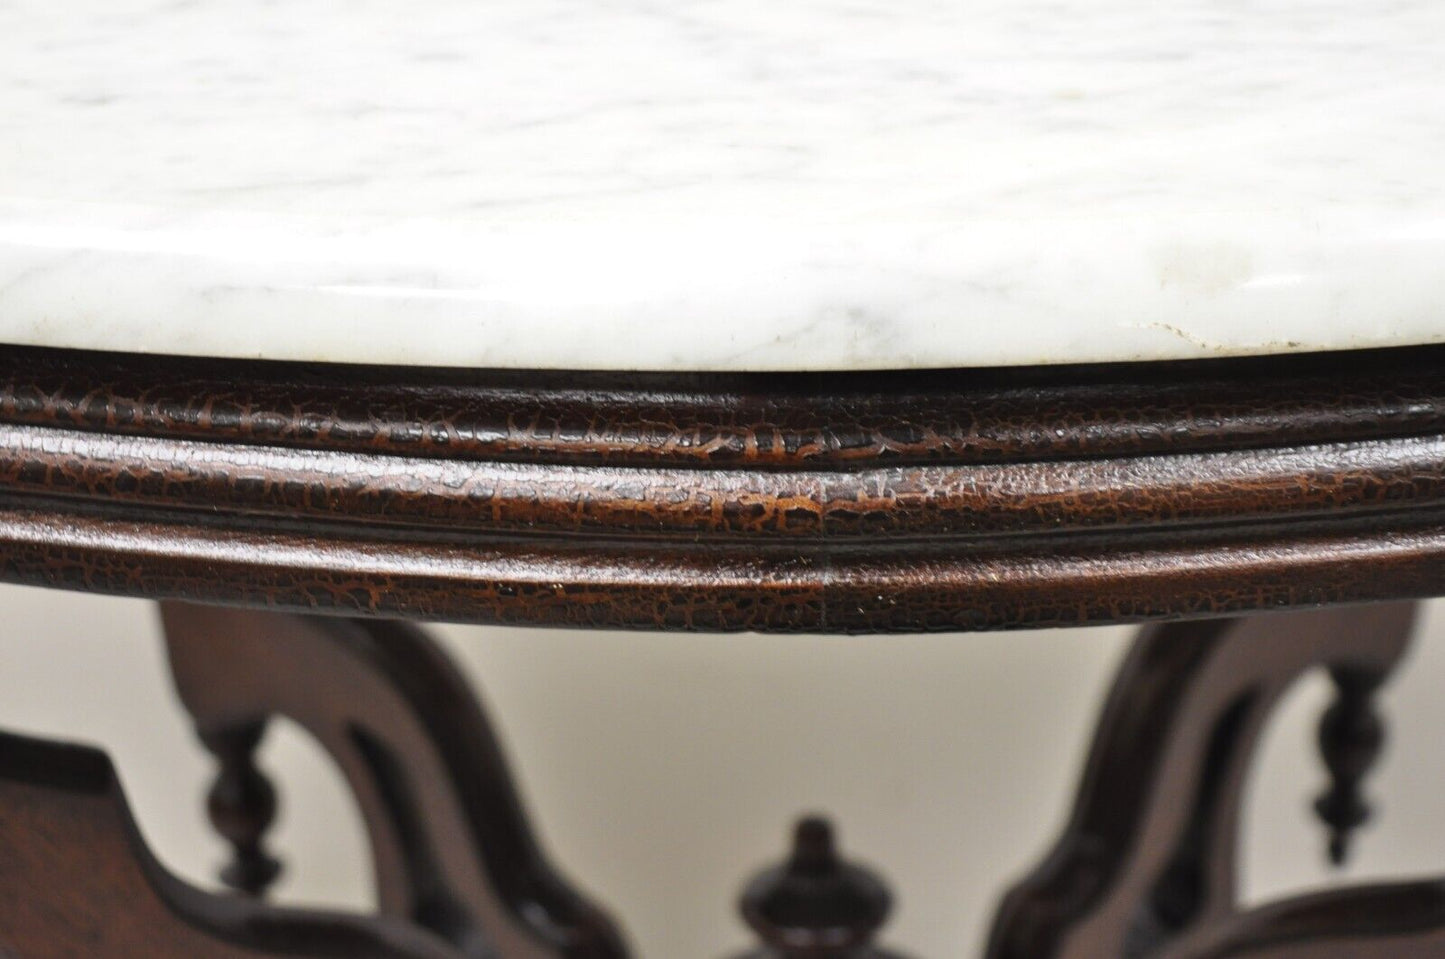 Antique Eastlake Victorian Walnut Oval Marble Top Parlor Lamp Table